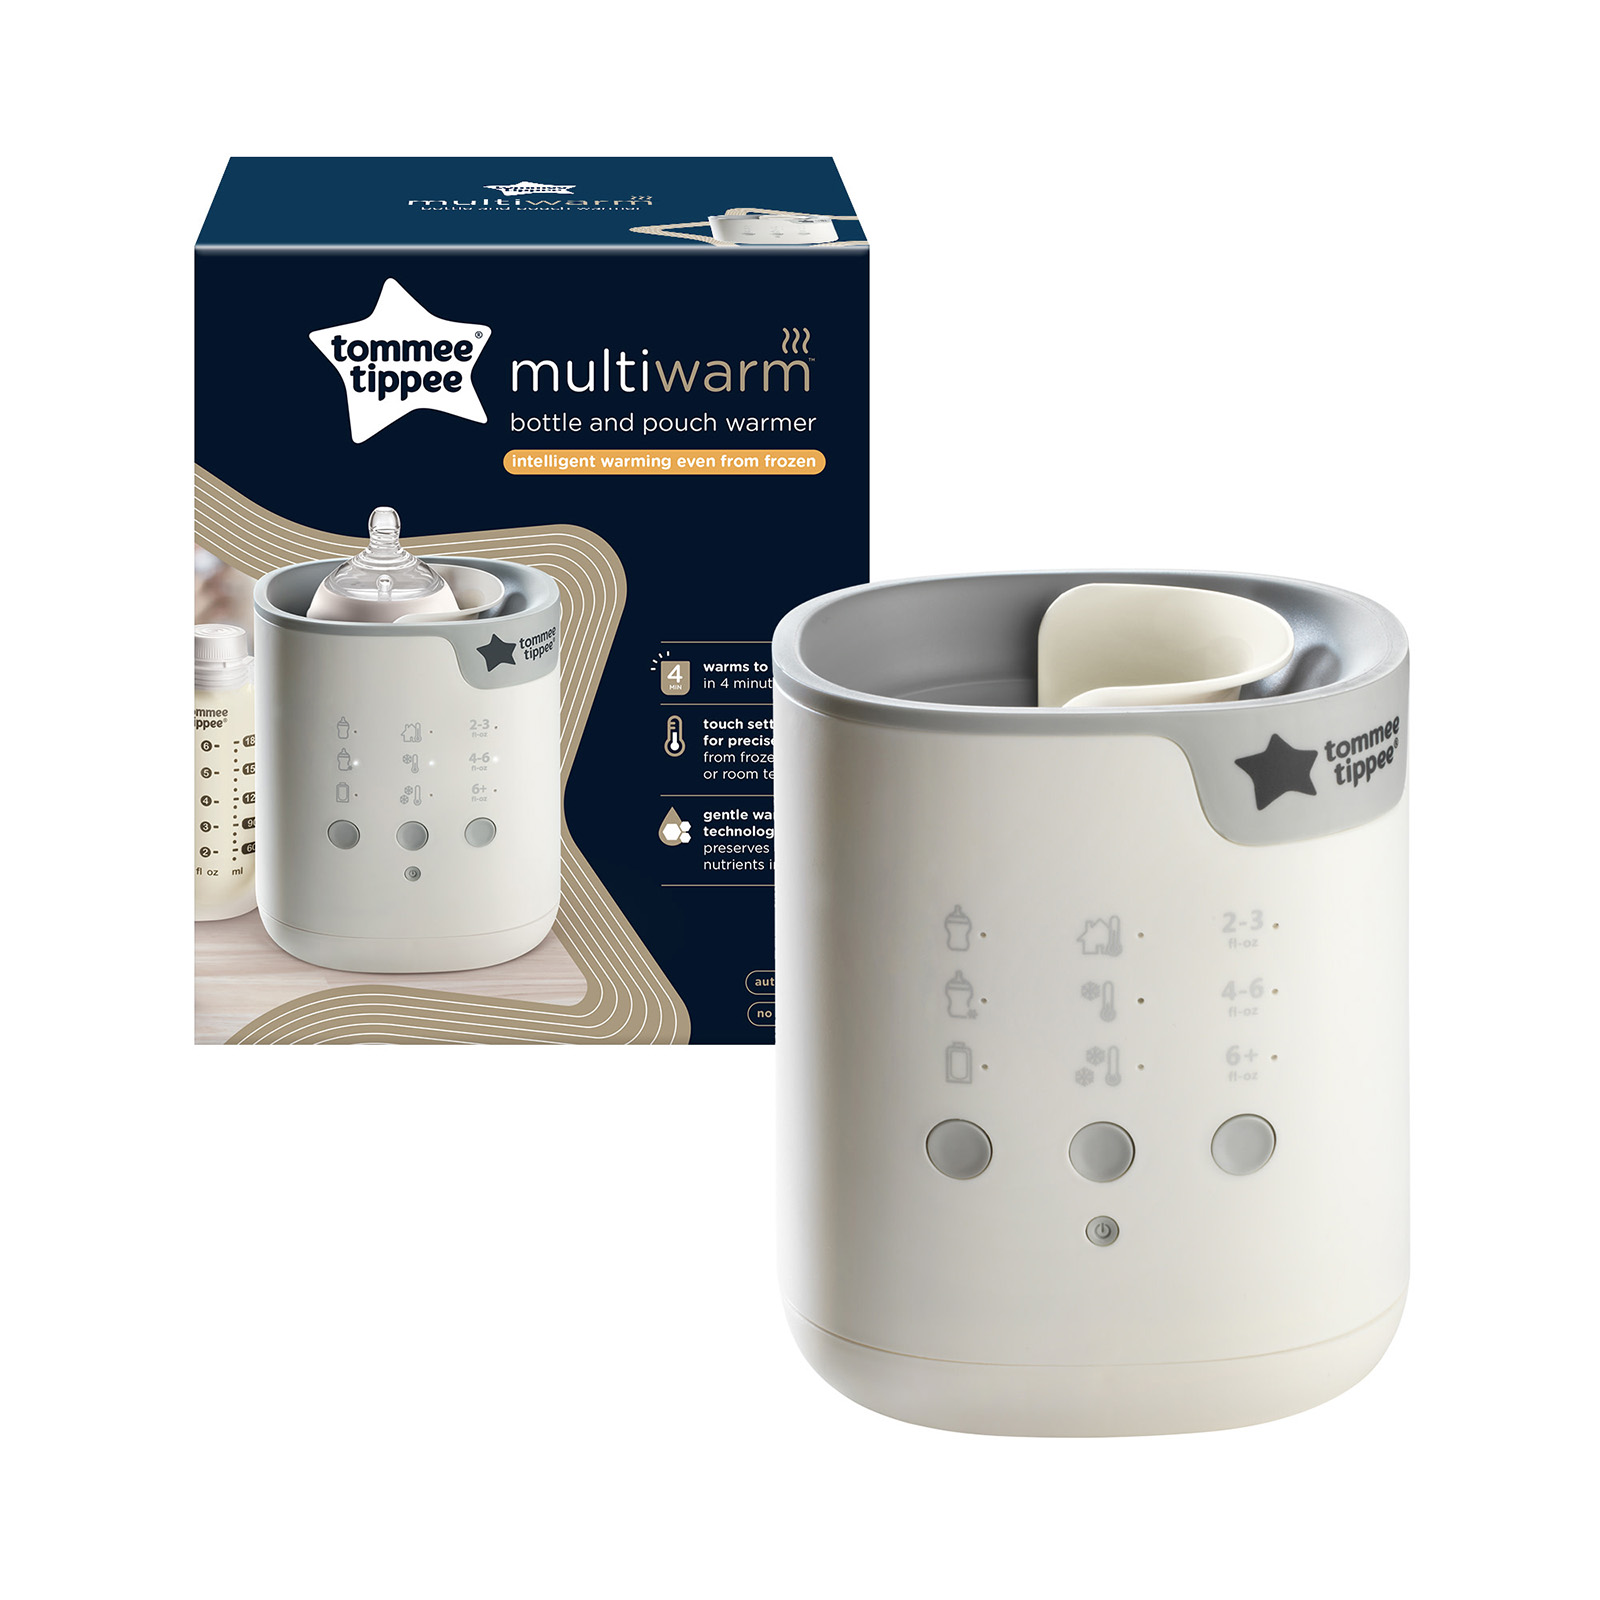 Tommee Tippee Multiwarm Intuitive Pouch & Bottle Milk Warmer - White